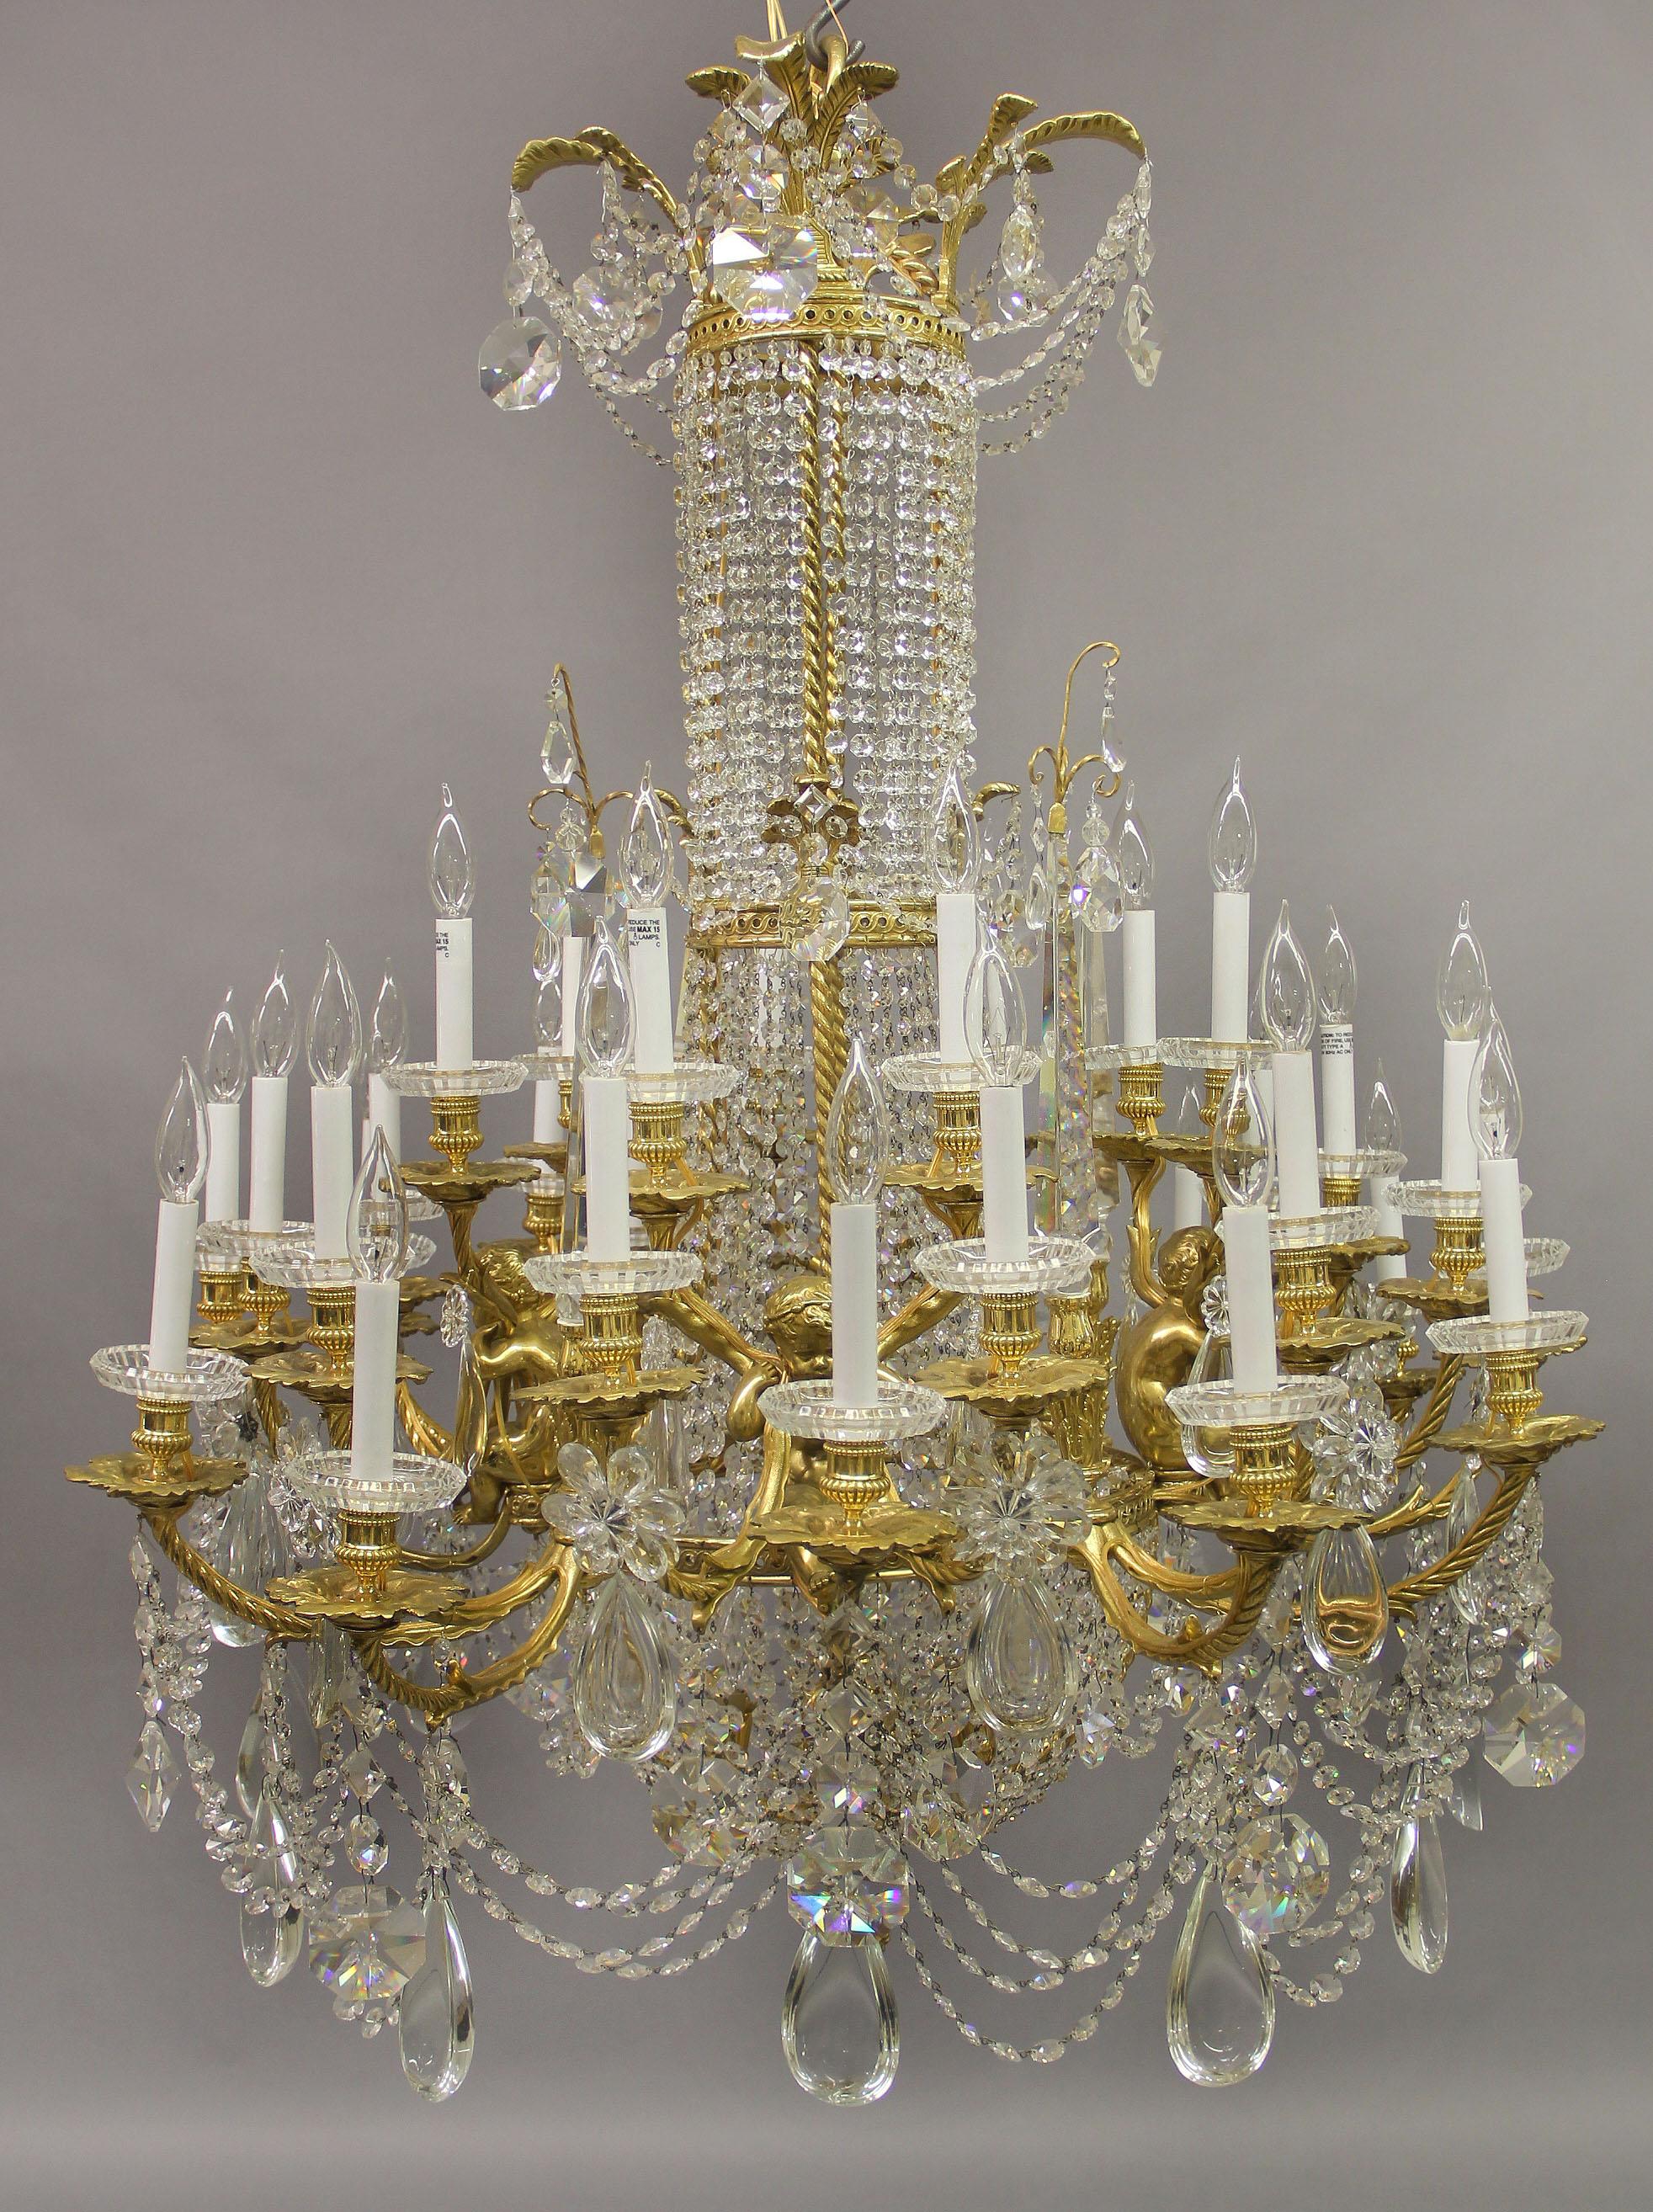 An exquisite late 19th century gilt bronze and crystal thirty six light chandelier by Baccarat

Compagnie des Cristalleries de Baccarat

The circular palm-frond and guilloché corona suspending drop chains and rope-twists supporting a similar